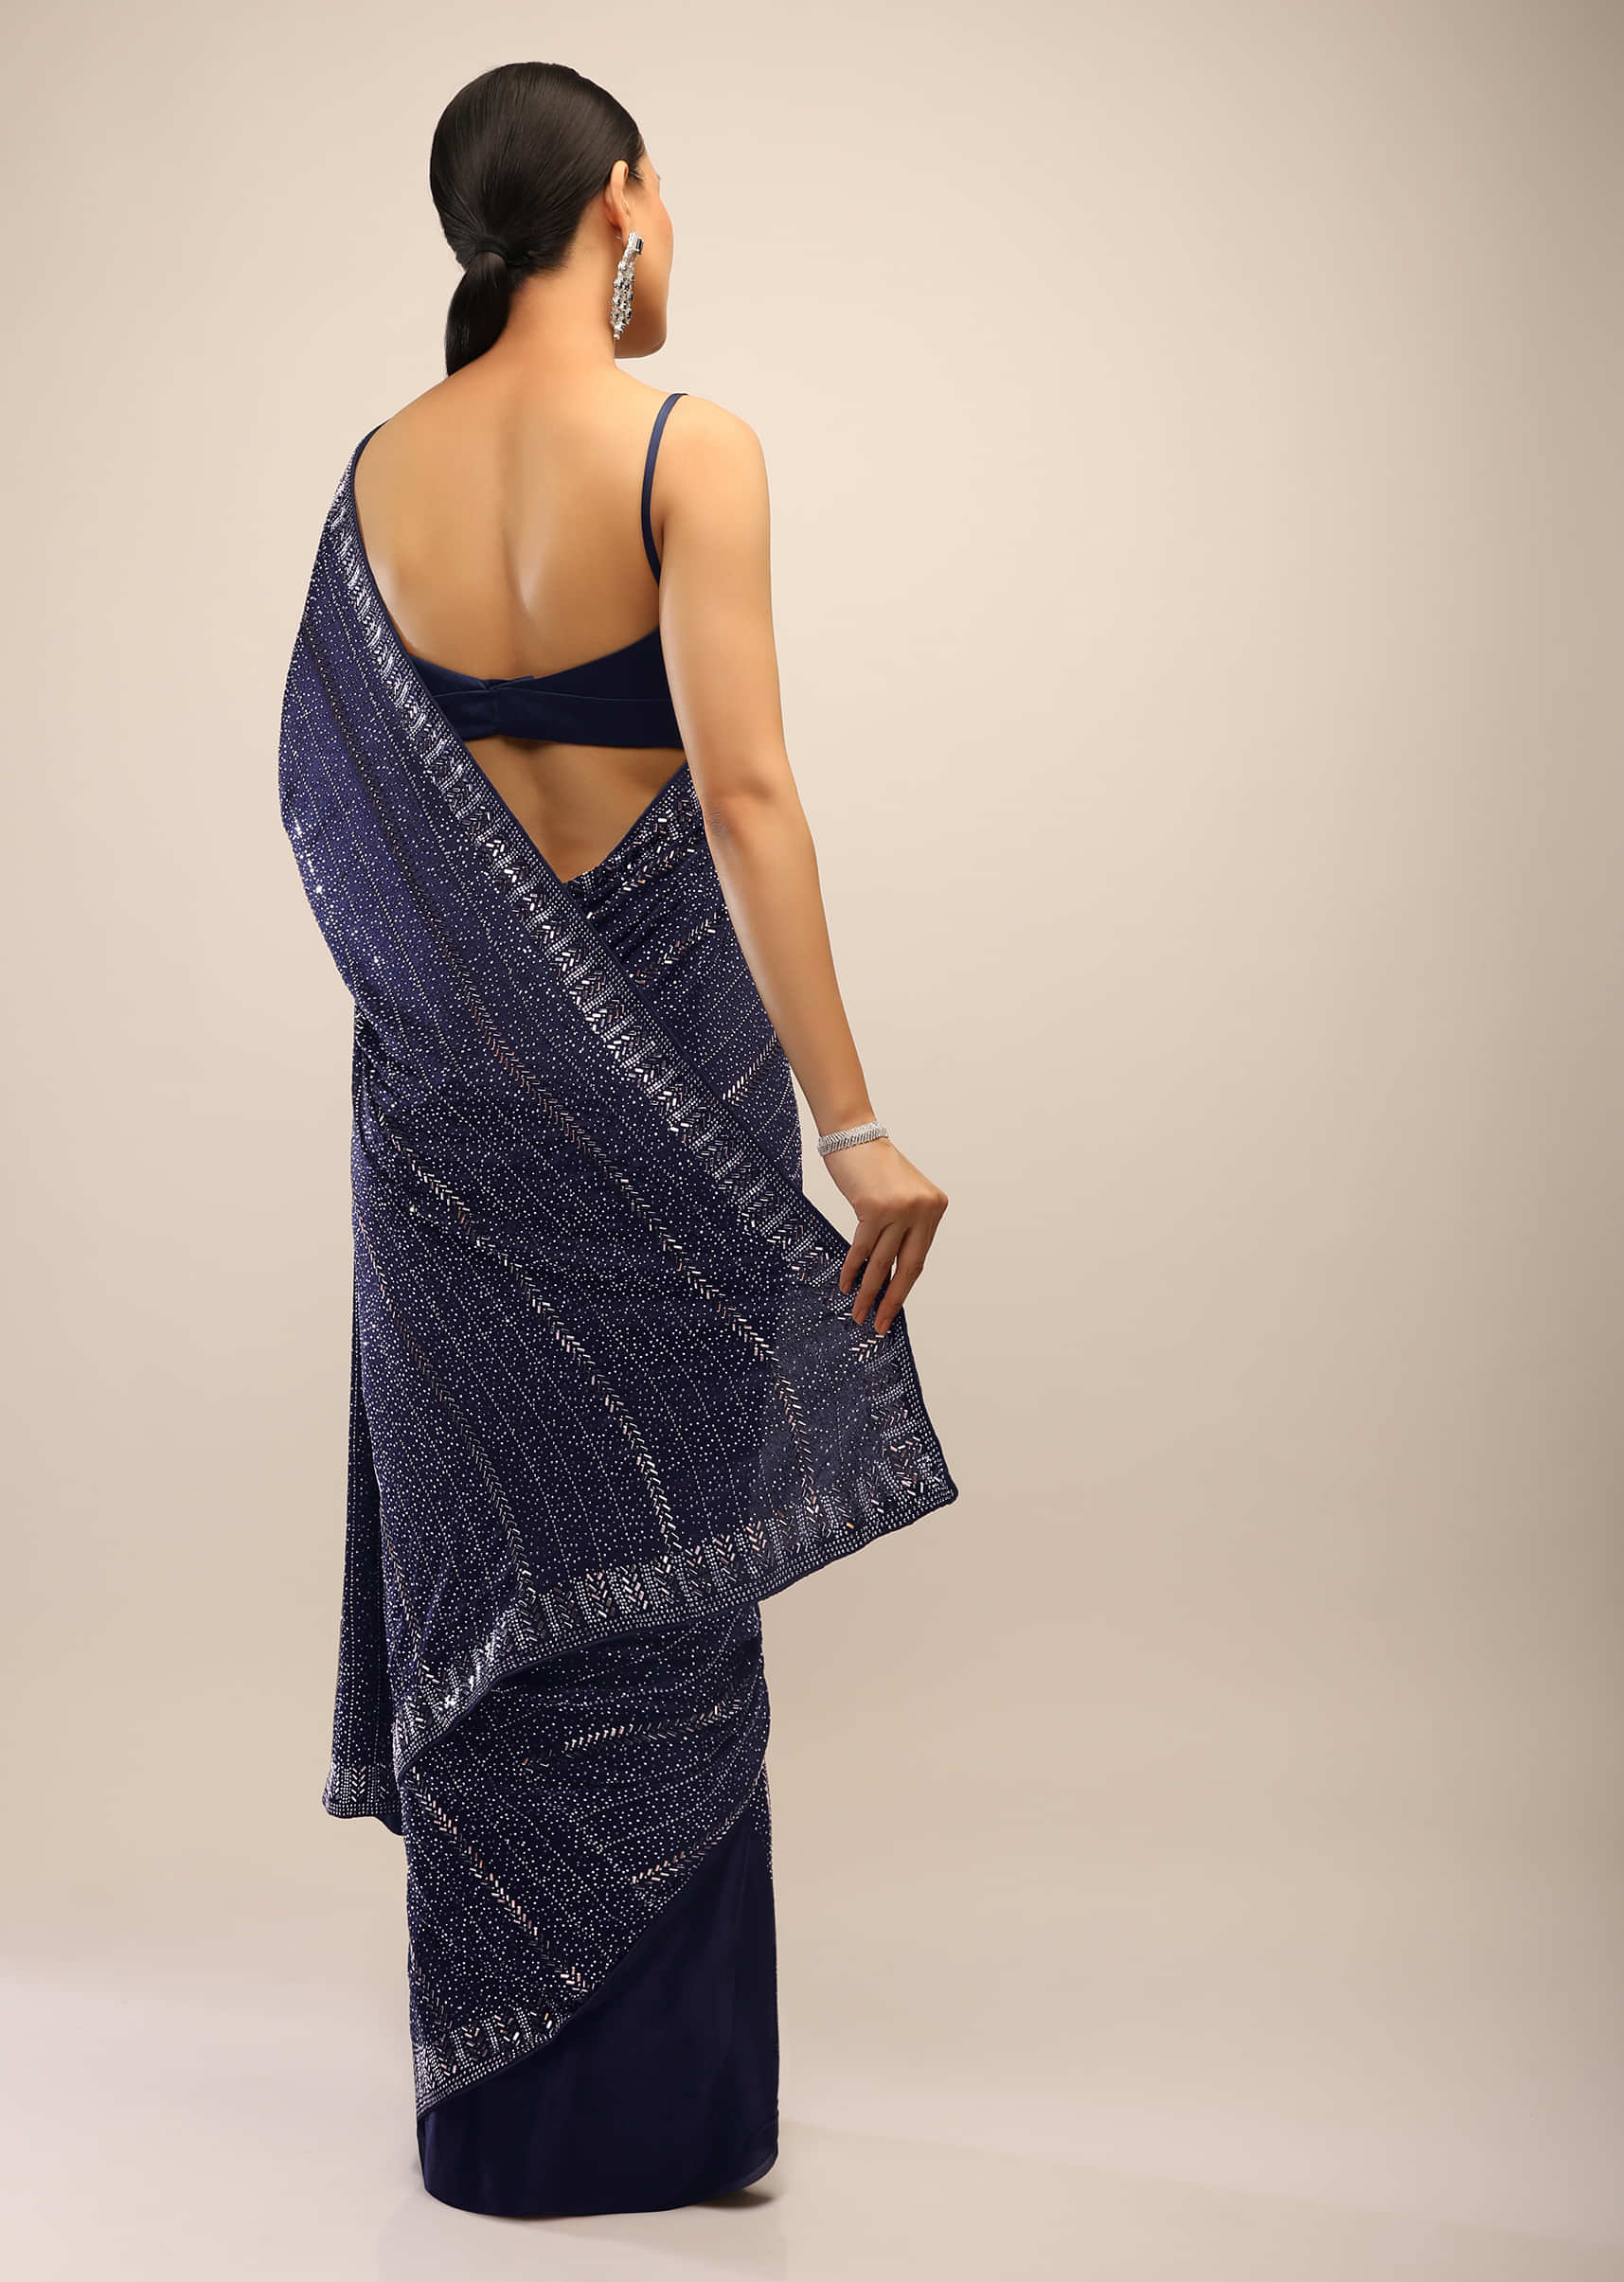 Midnight Blue Saree In Chiffon Satin Heavily Embellished With Kundan Work On The Pallu And Border